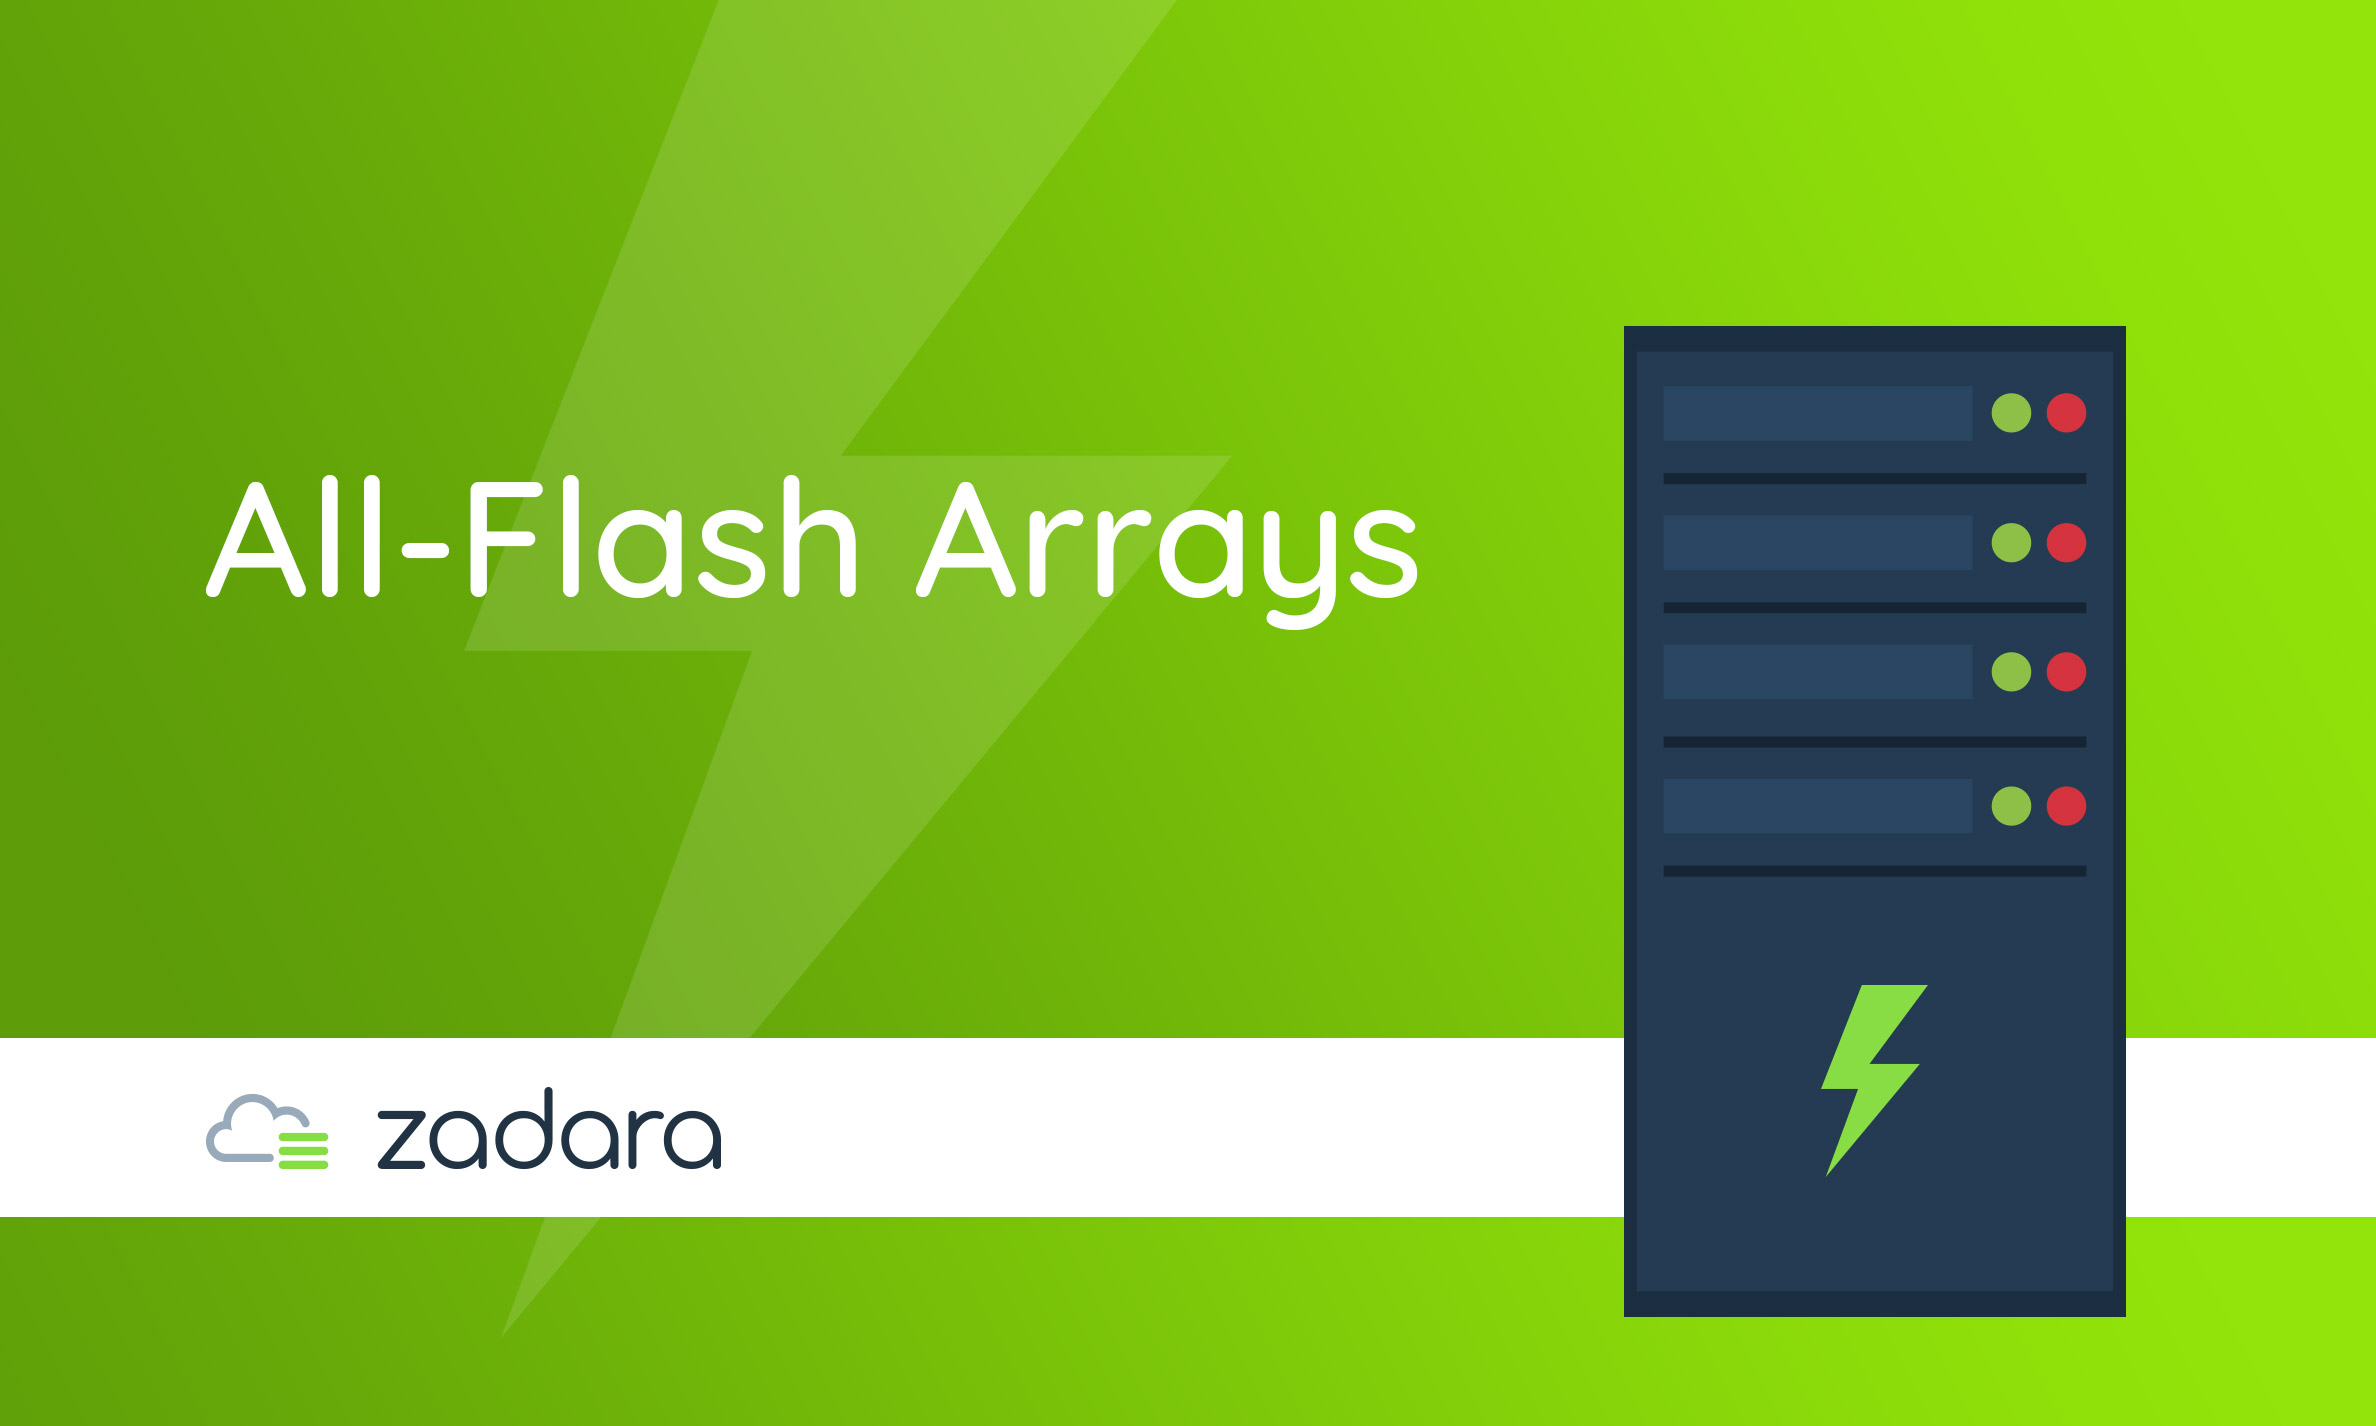 Zadara Adds All-Flash Arrays, Advanced Features to Its Service Offering